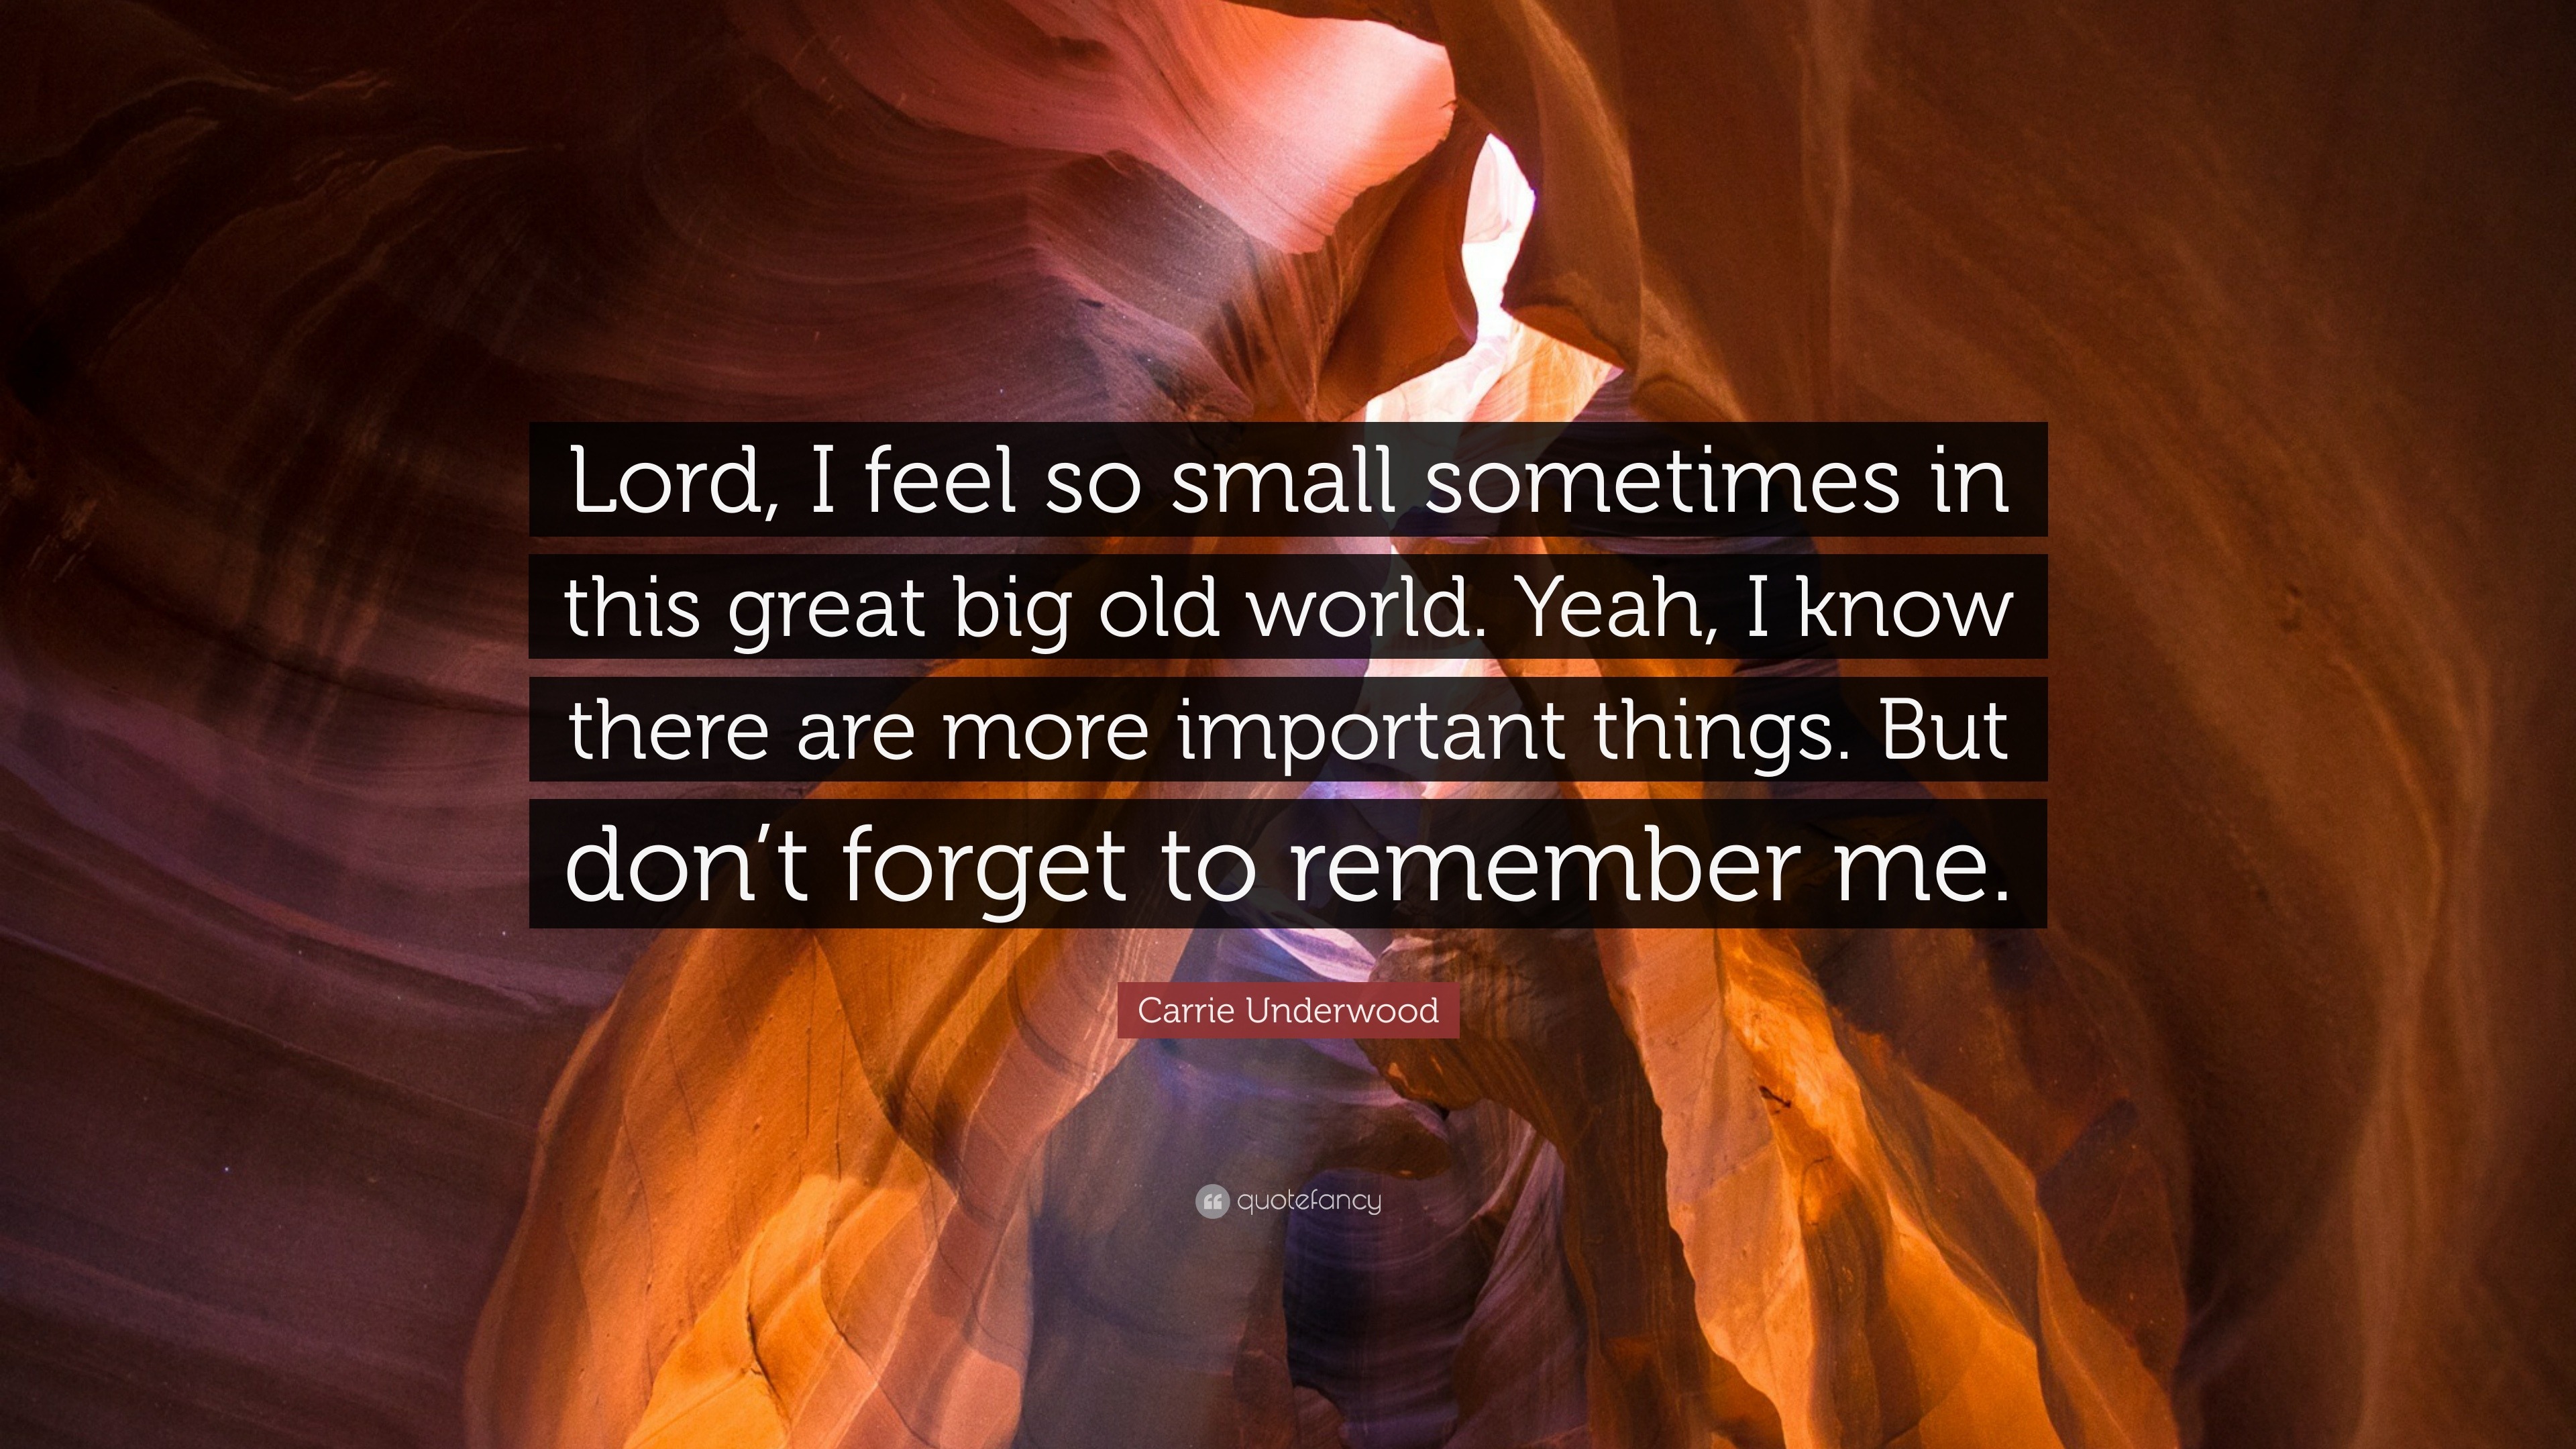 Carrie Underwood Quote: “Lord, I feel so small sometimes in this great